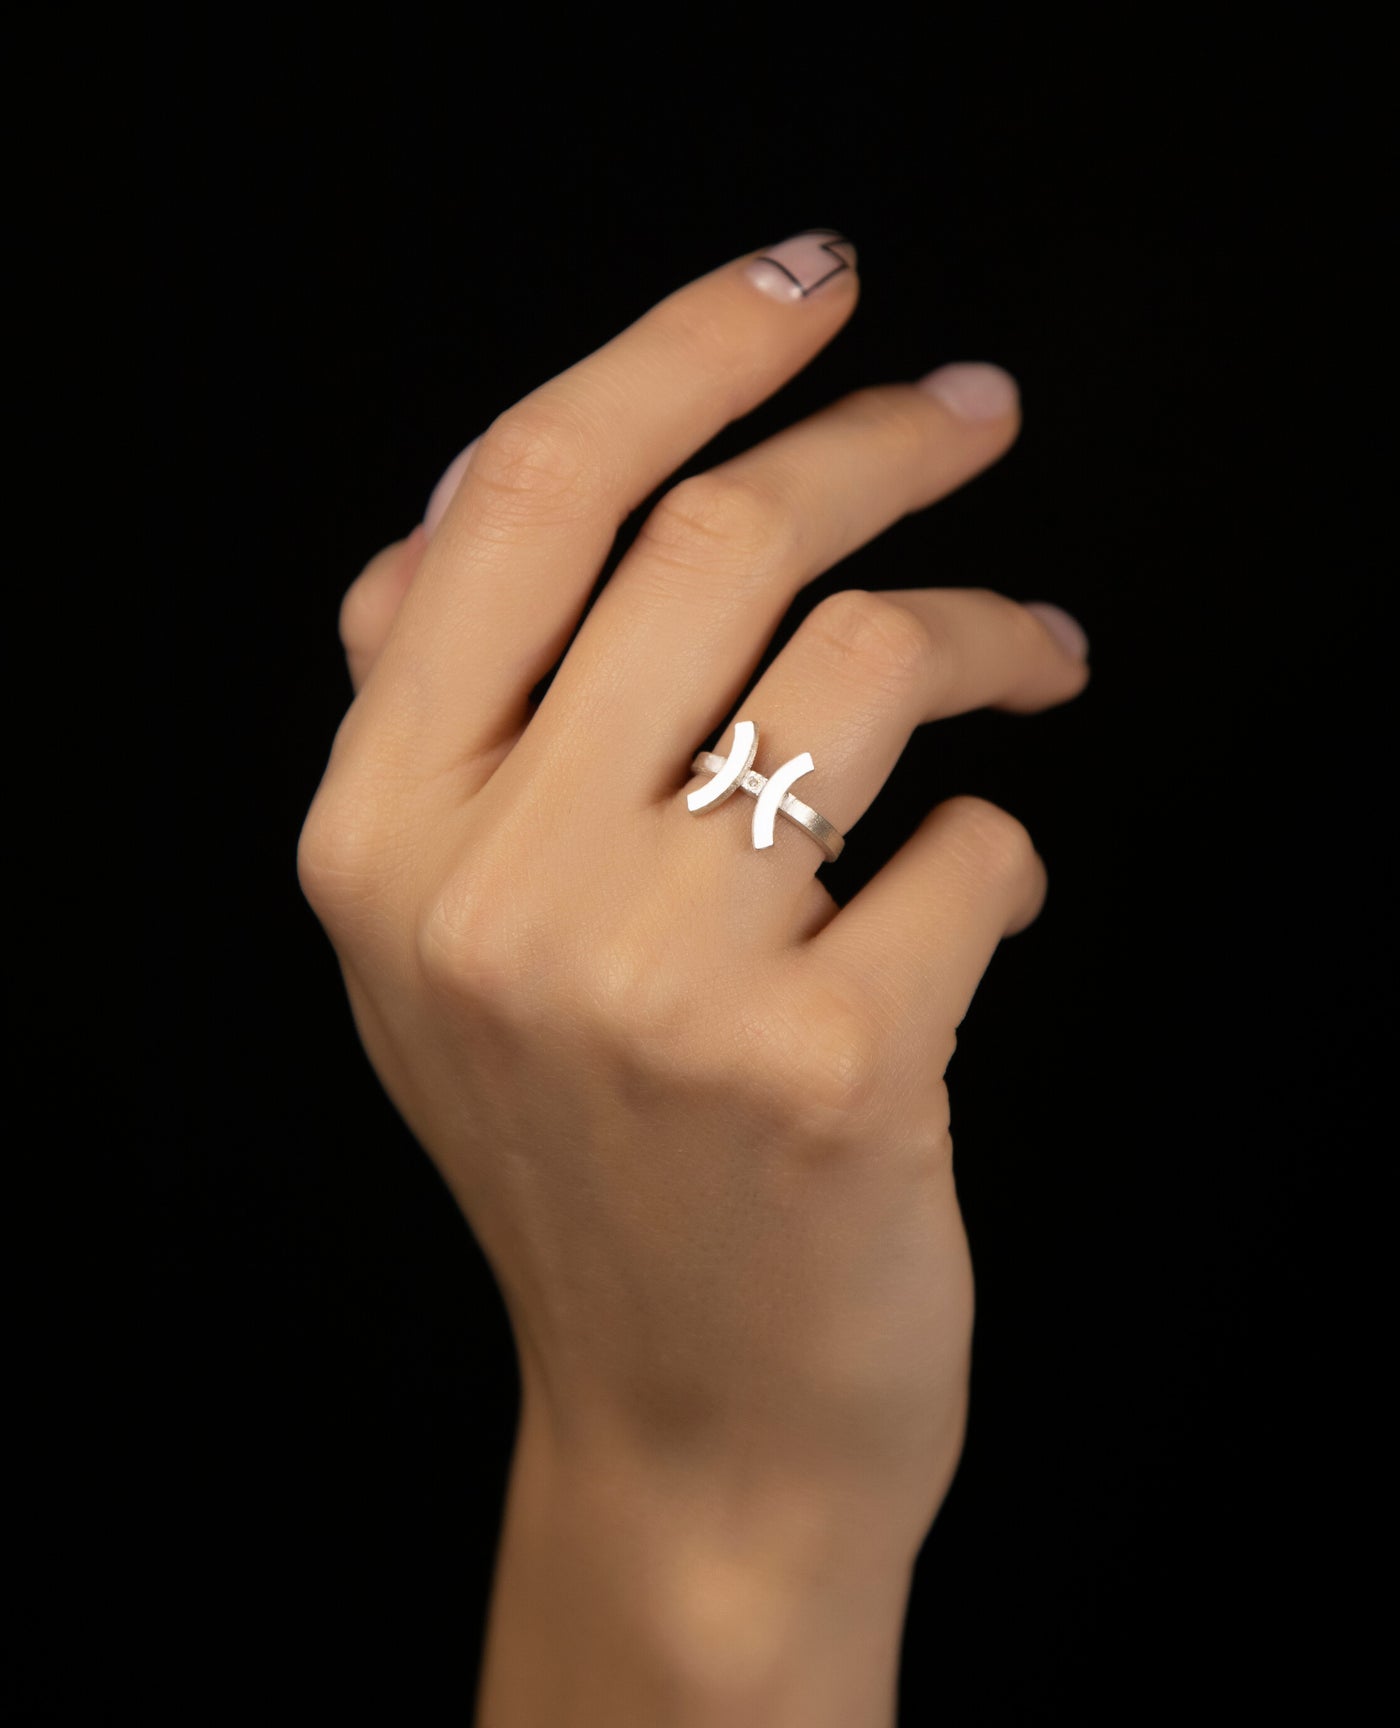 Unisex Pisces Ring in Sterling Silver 925 with a Diamonds.